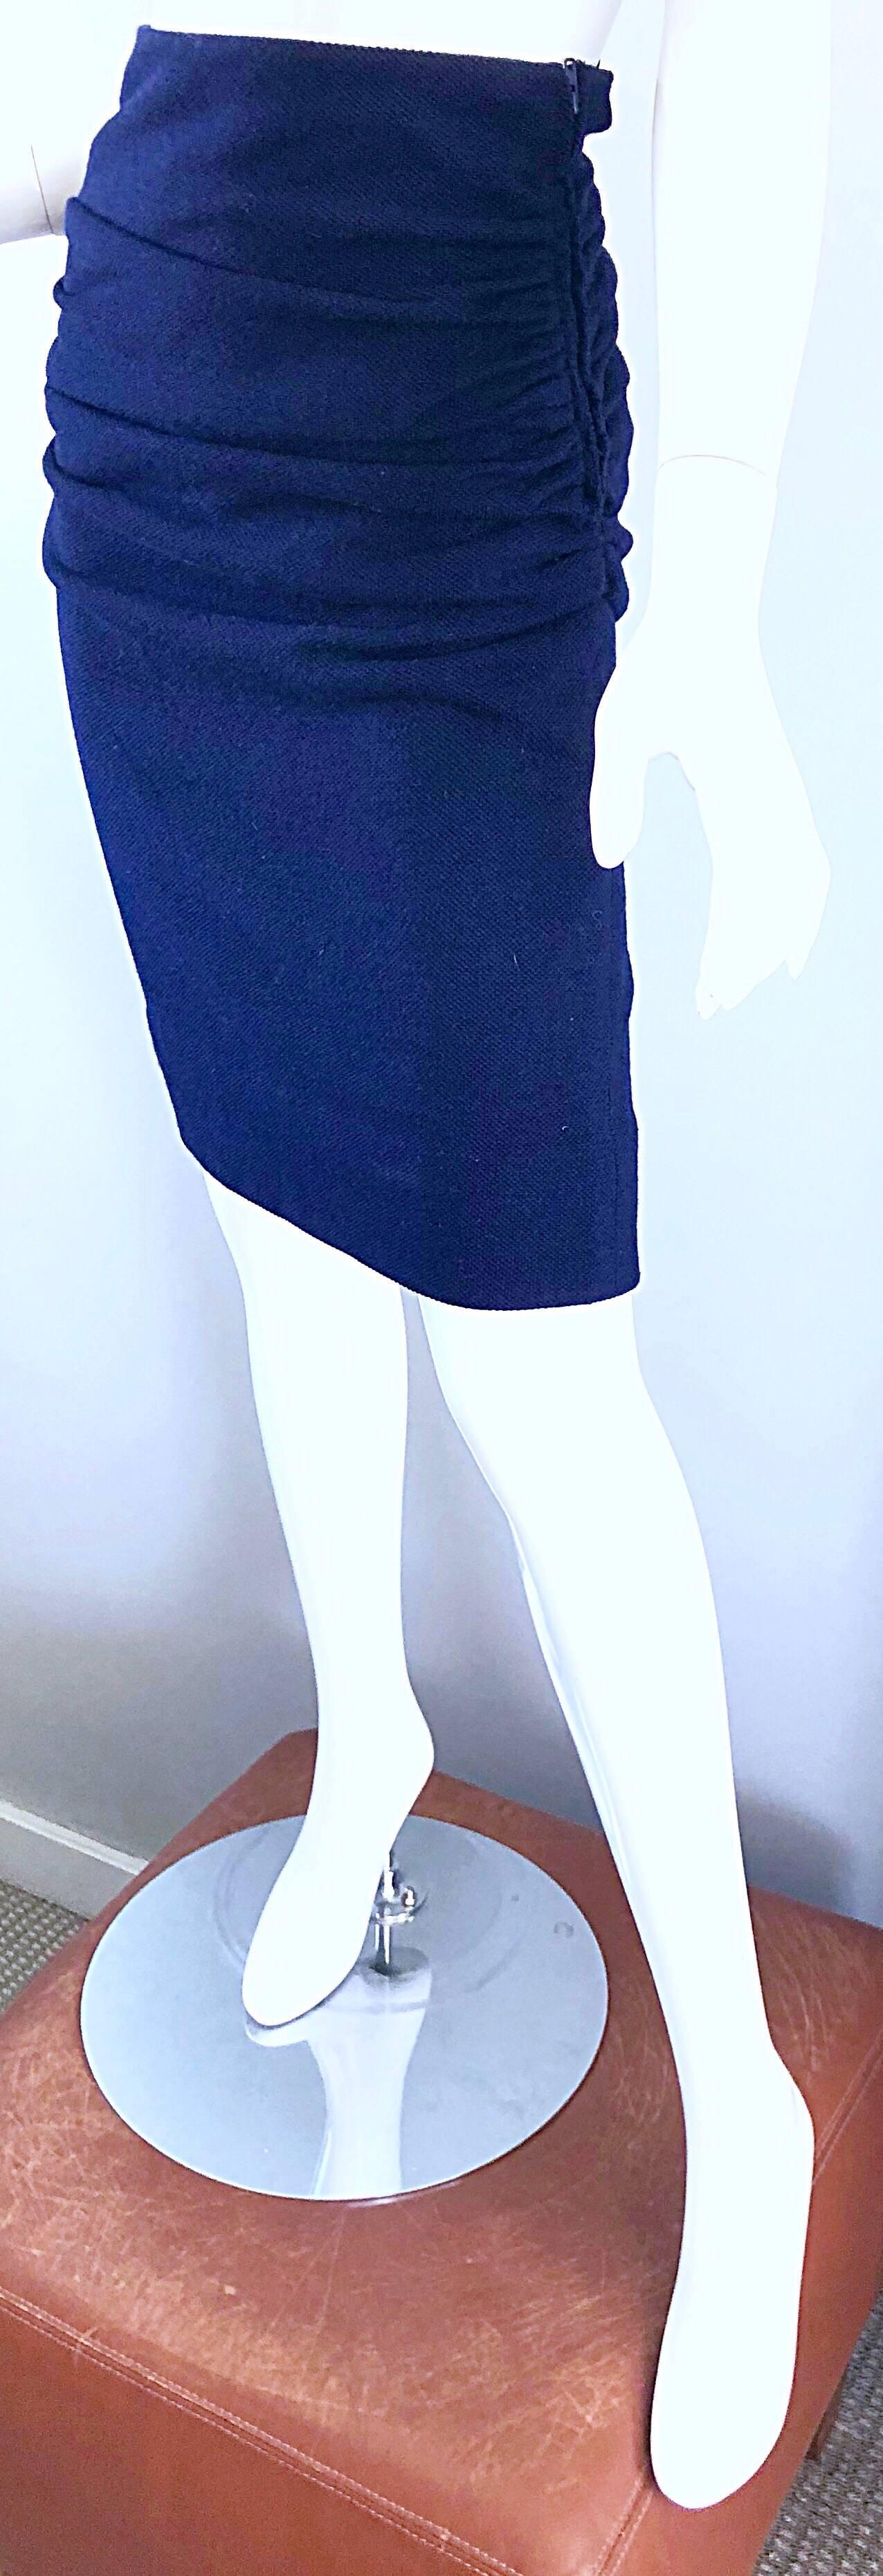 1990s Karl Lagerfeld High Waisted Navy Blue Wool Ruched 90s VIntage Pencil Skirt In Excellent Condition For Sale In San Diego, CA